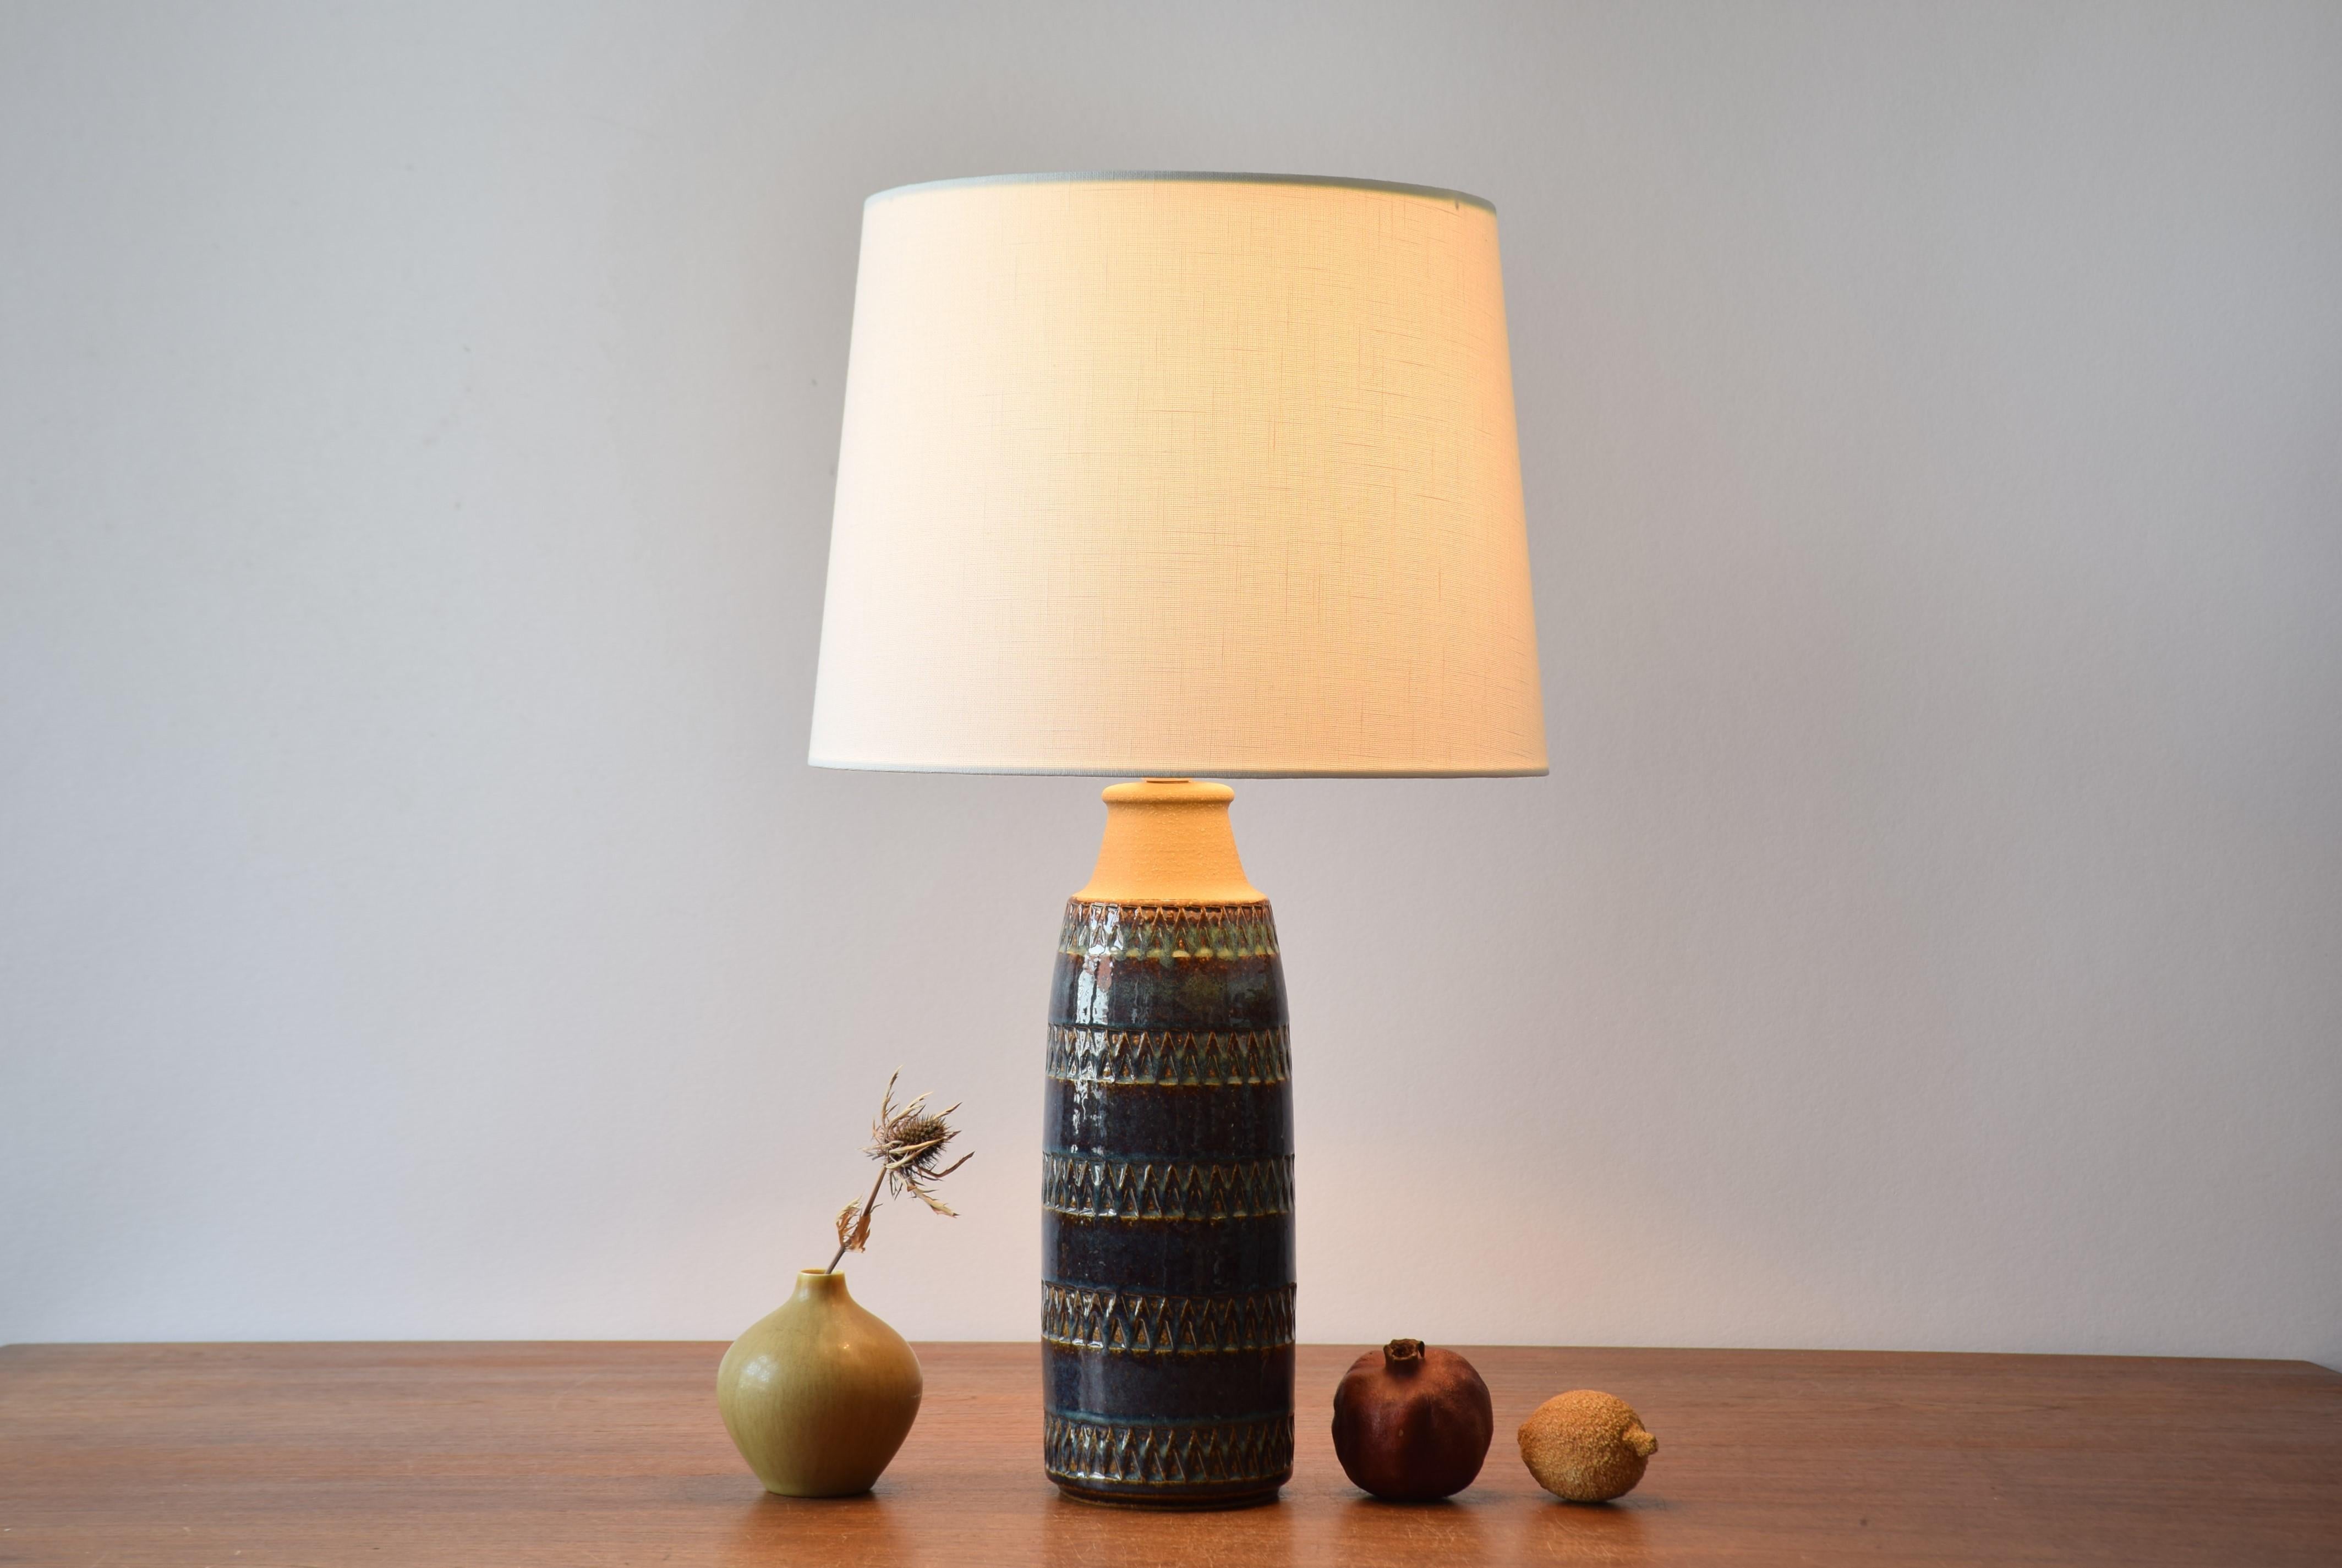 Tall table lamp from Søholm Stentøj, Denmark, circa 1960s.
The glaze is blue with caramel brown elements. The neck is unglazed and shows the warm sand colored clay color.

Included is a new lamp shade designed and made in Denmark. It is made of